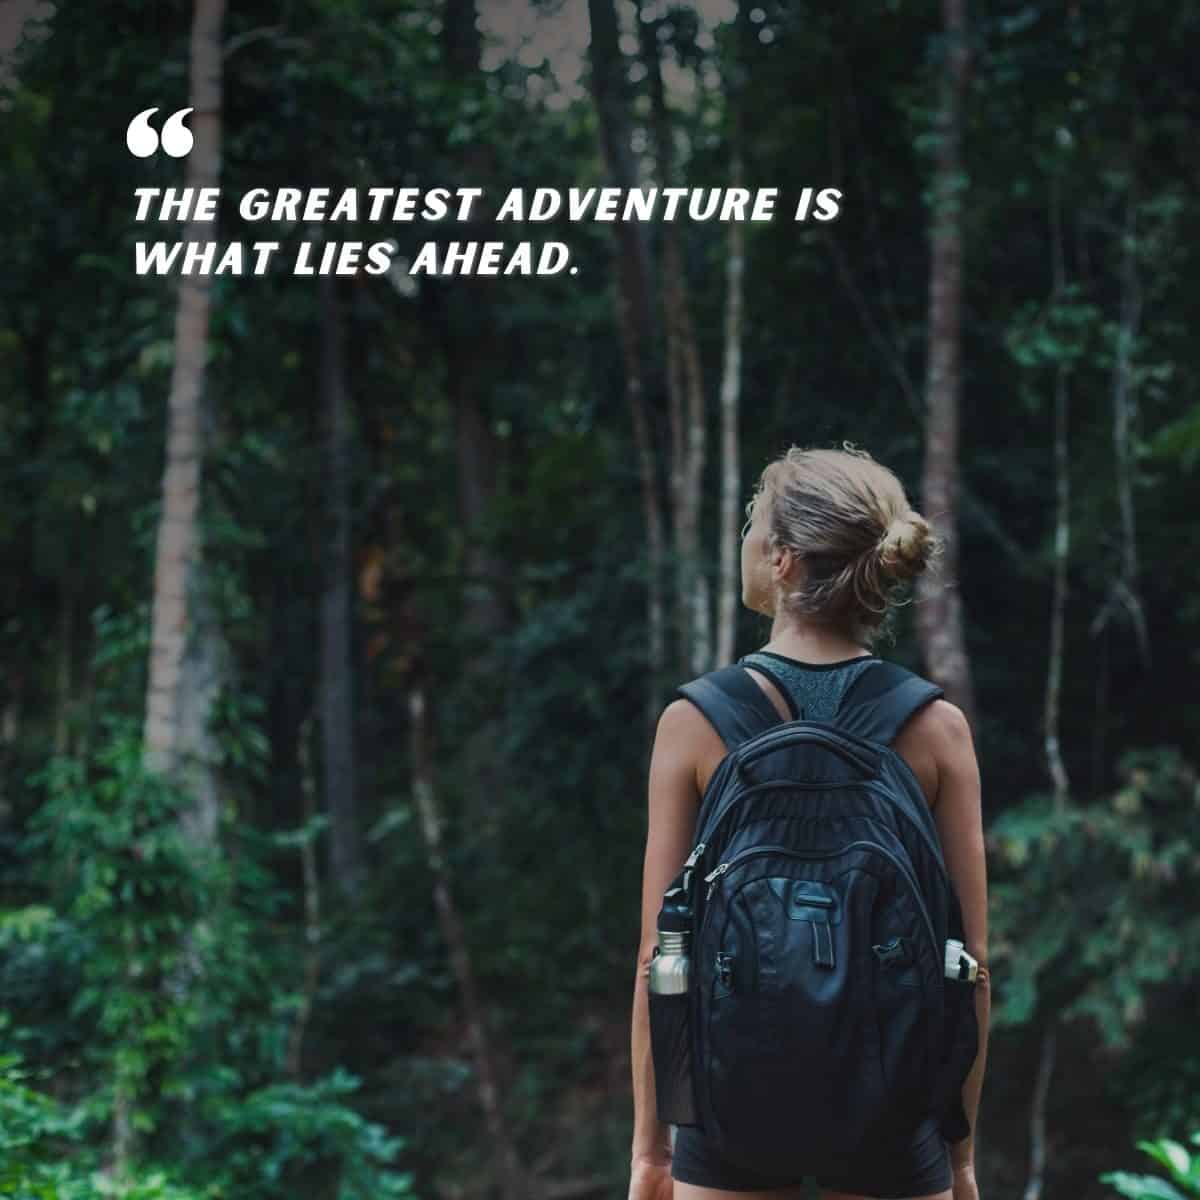 The Greatest Adventure Is What Lies Ahead.